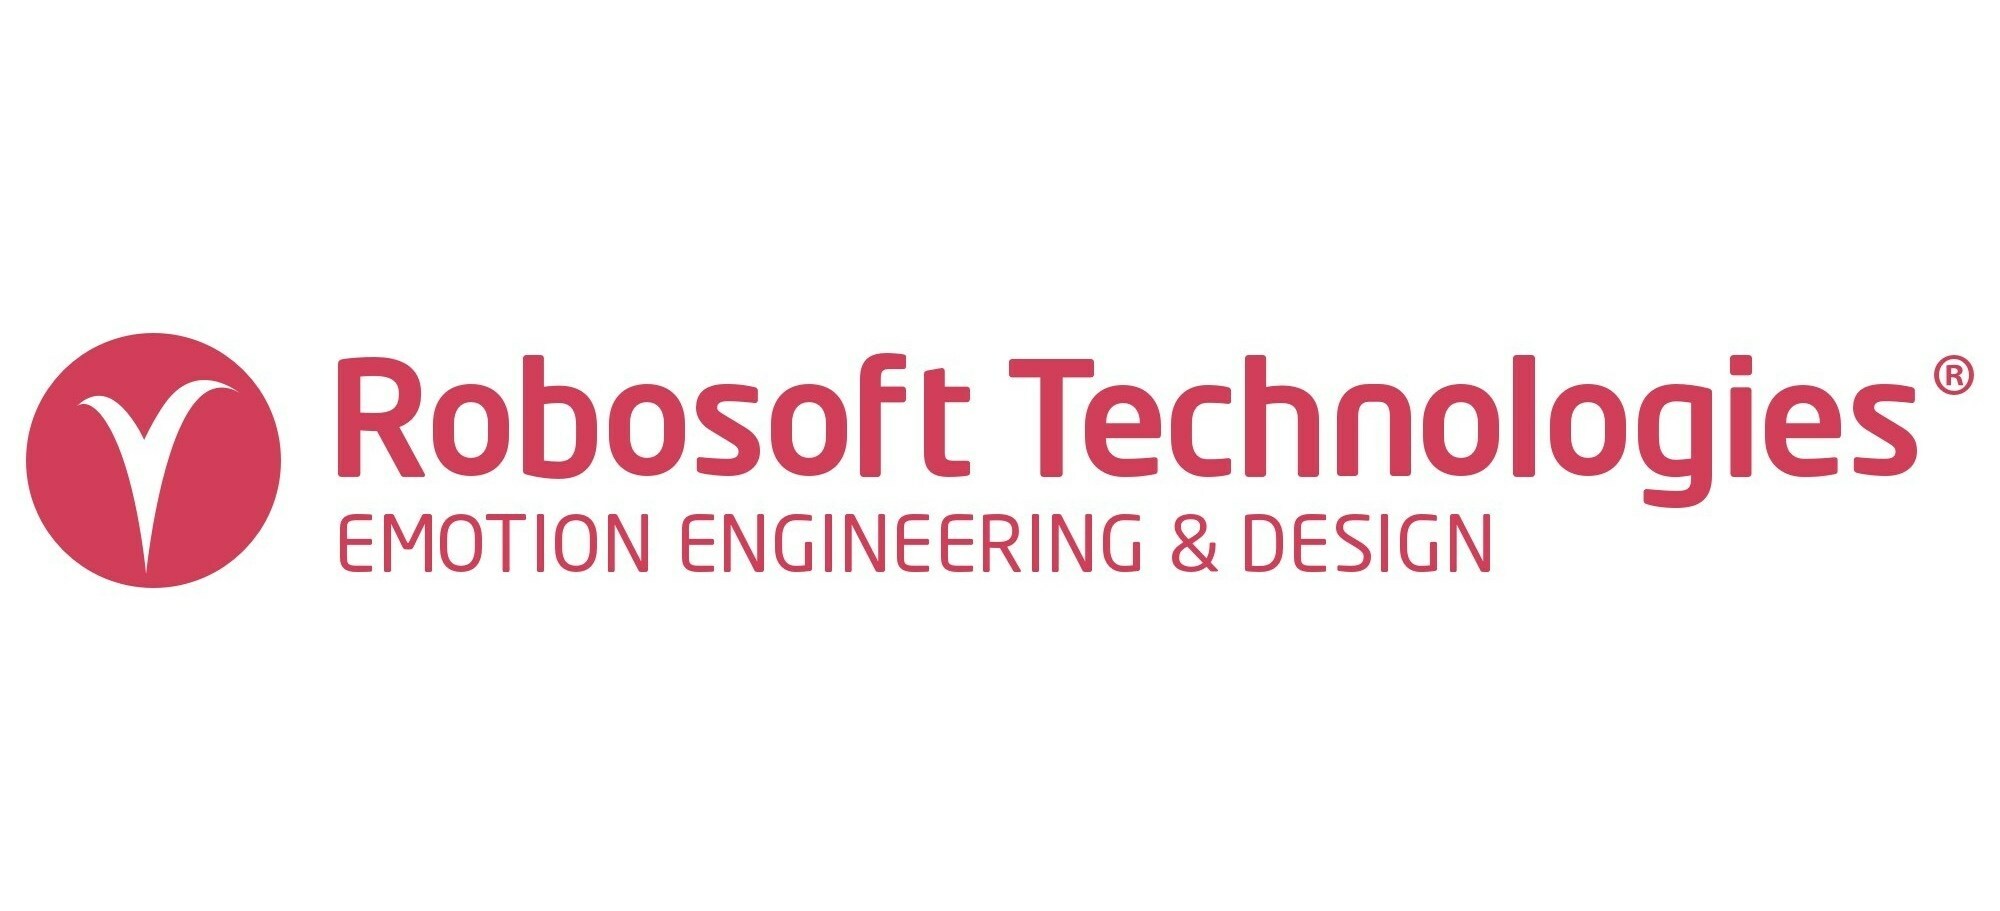 Robosoft adds capabilities in embedded engineering after integration of TechnoPro India's operations